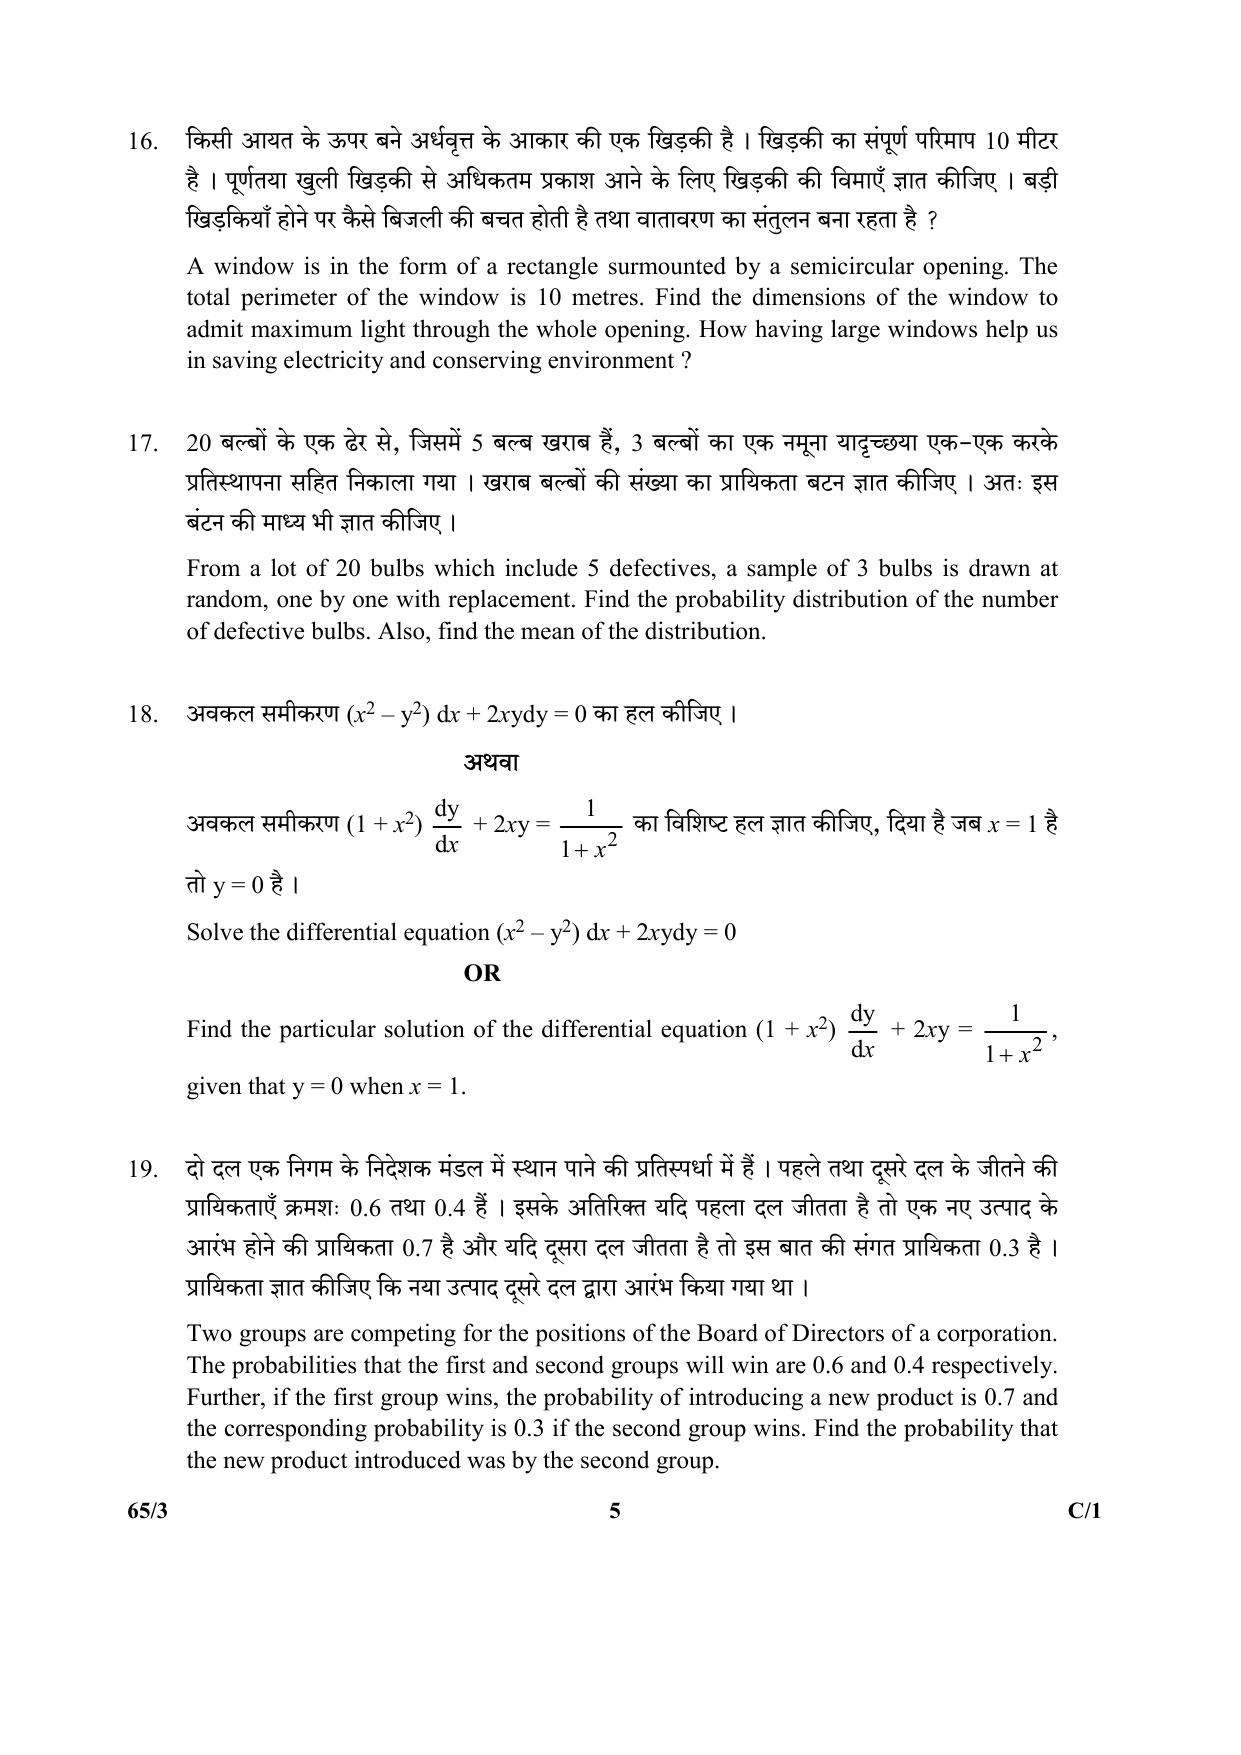 CBSE Class 12 65-3 (Mathematics) 2018 Compartment Question Paper - Page 5